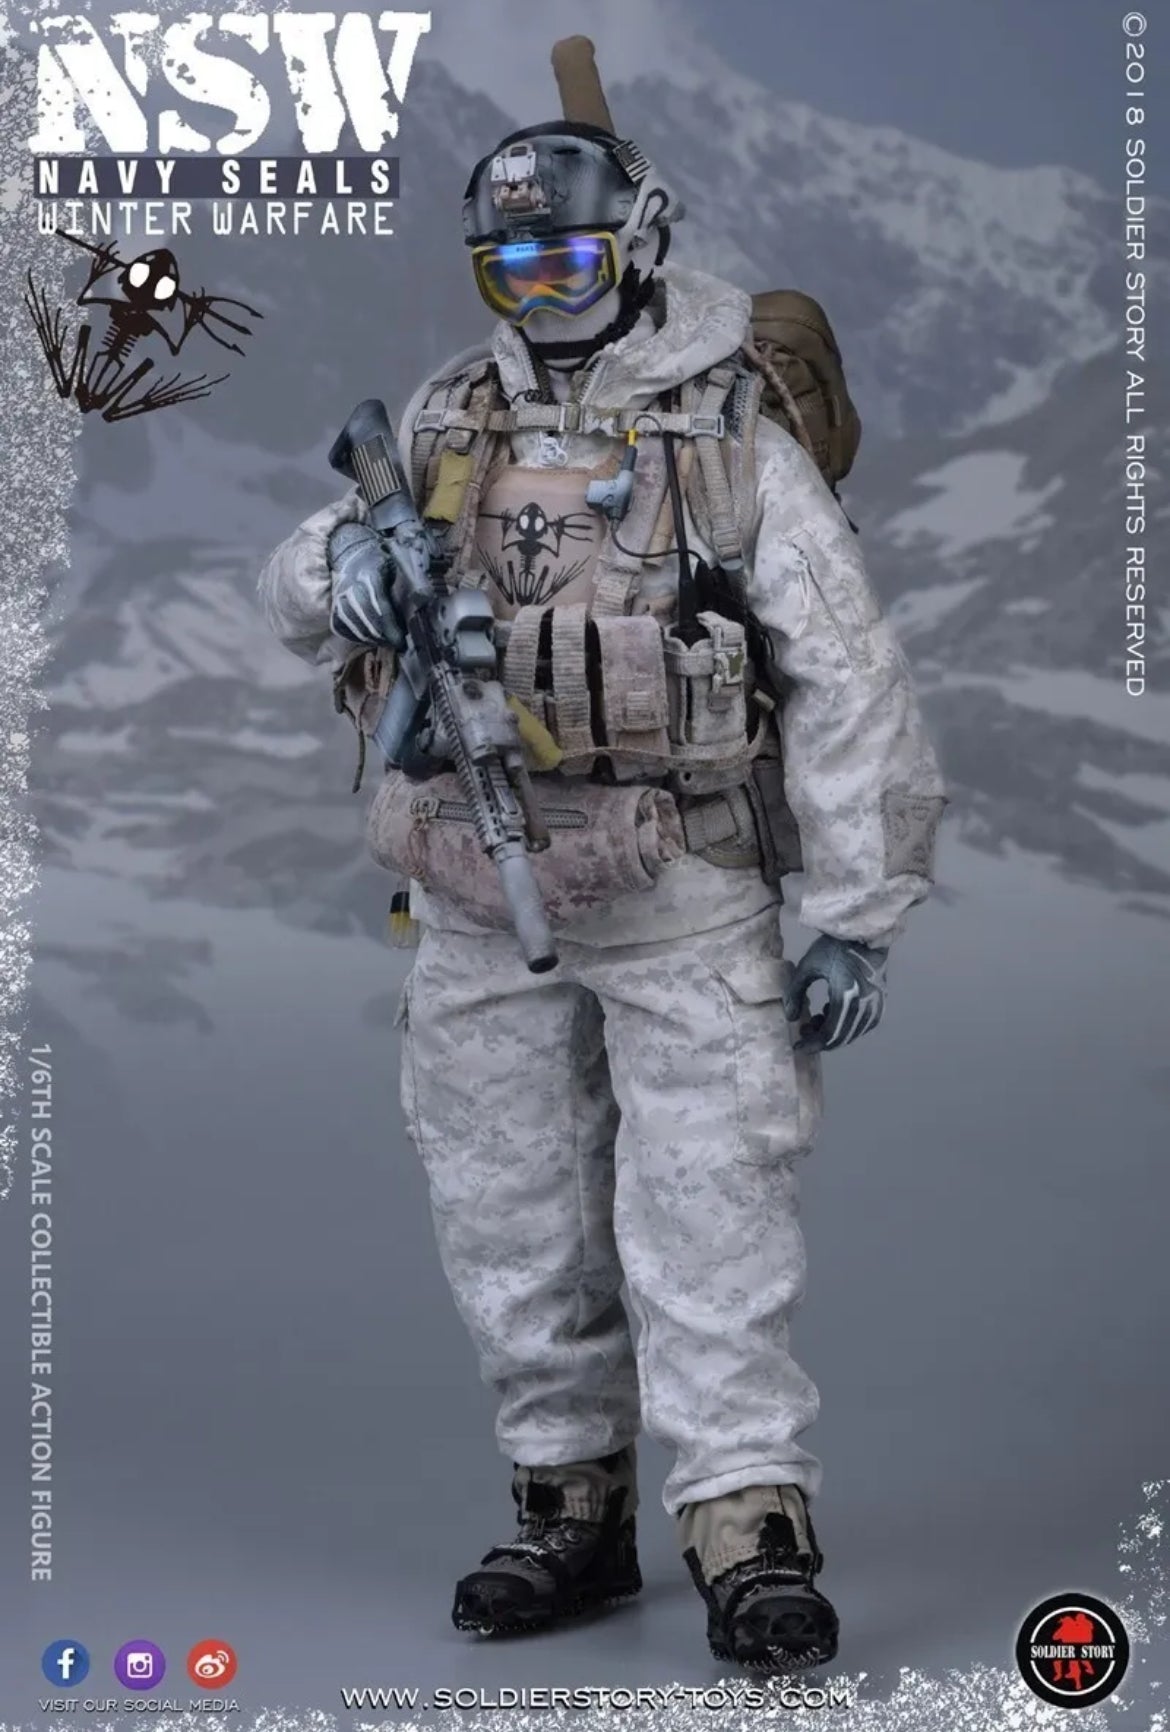 DHL 1/6 Soldier Story SS109 NSW Navy Seal Winter Warfare Marksman Action Figure